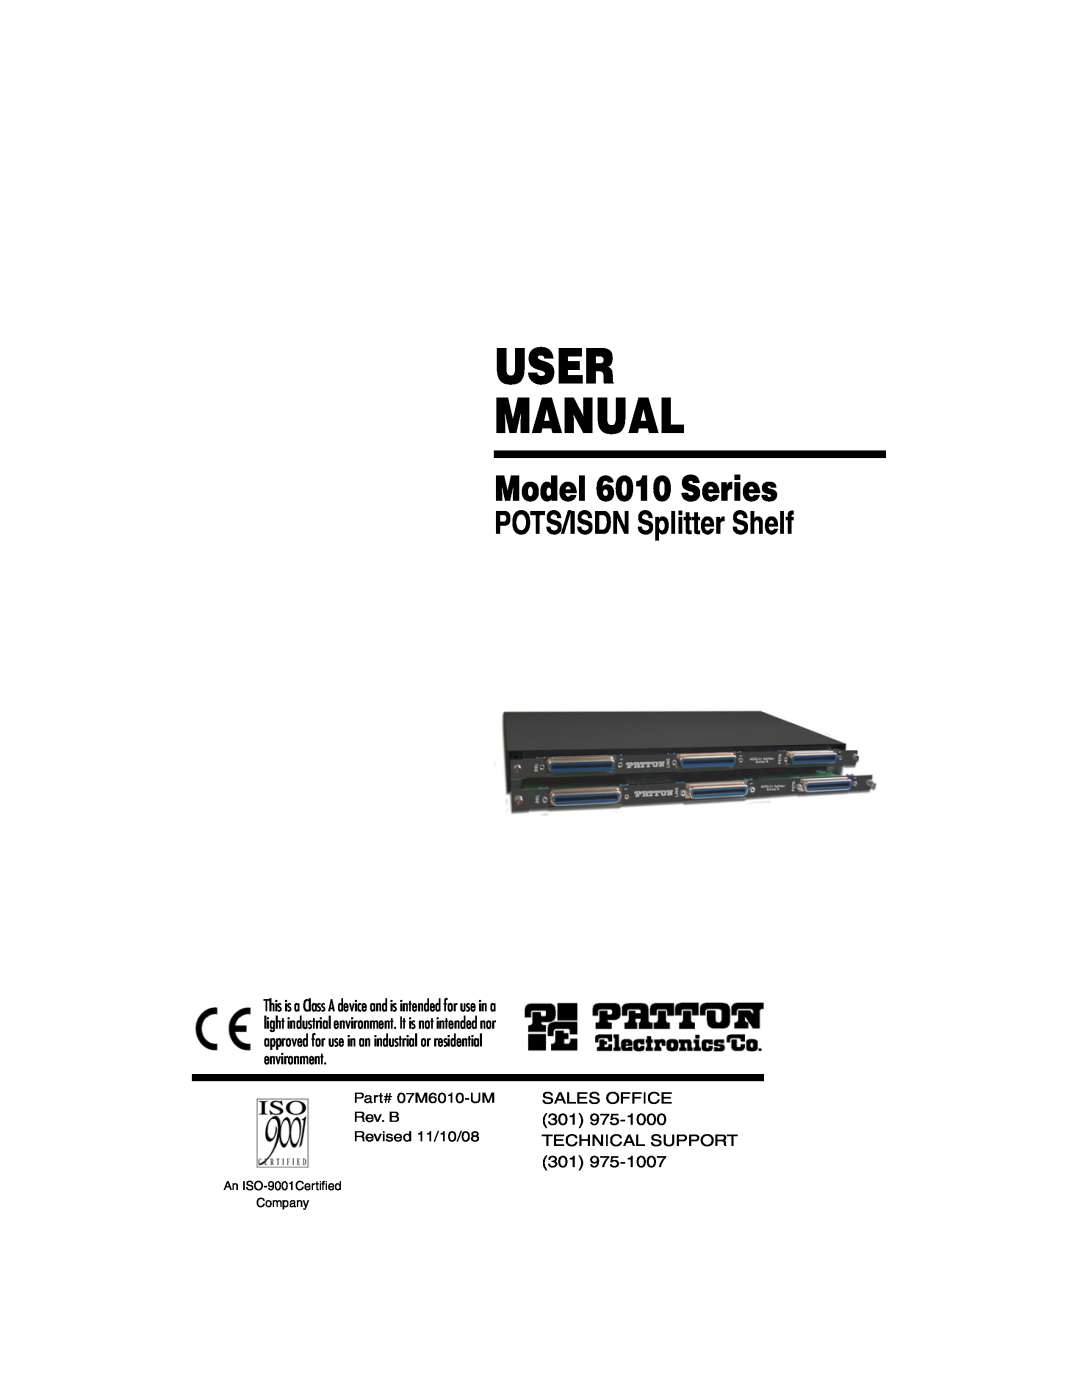 Patton electronic user manual SALES OFFICE 301 TECHNICAL SUPPORT, User Manual, Model 6010 Series 